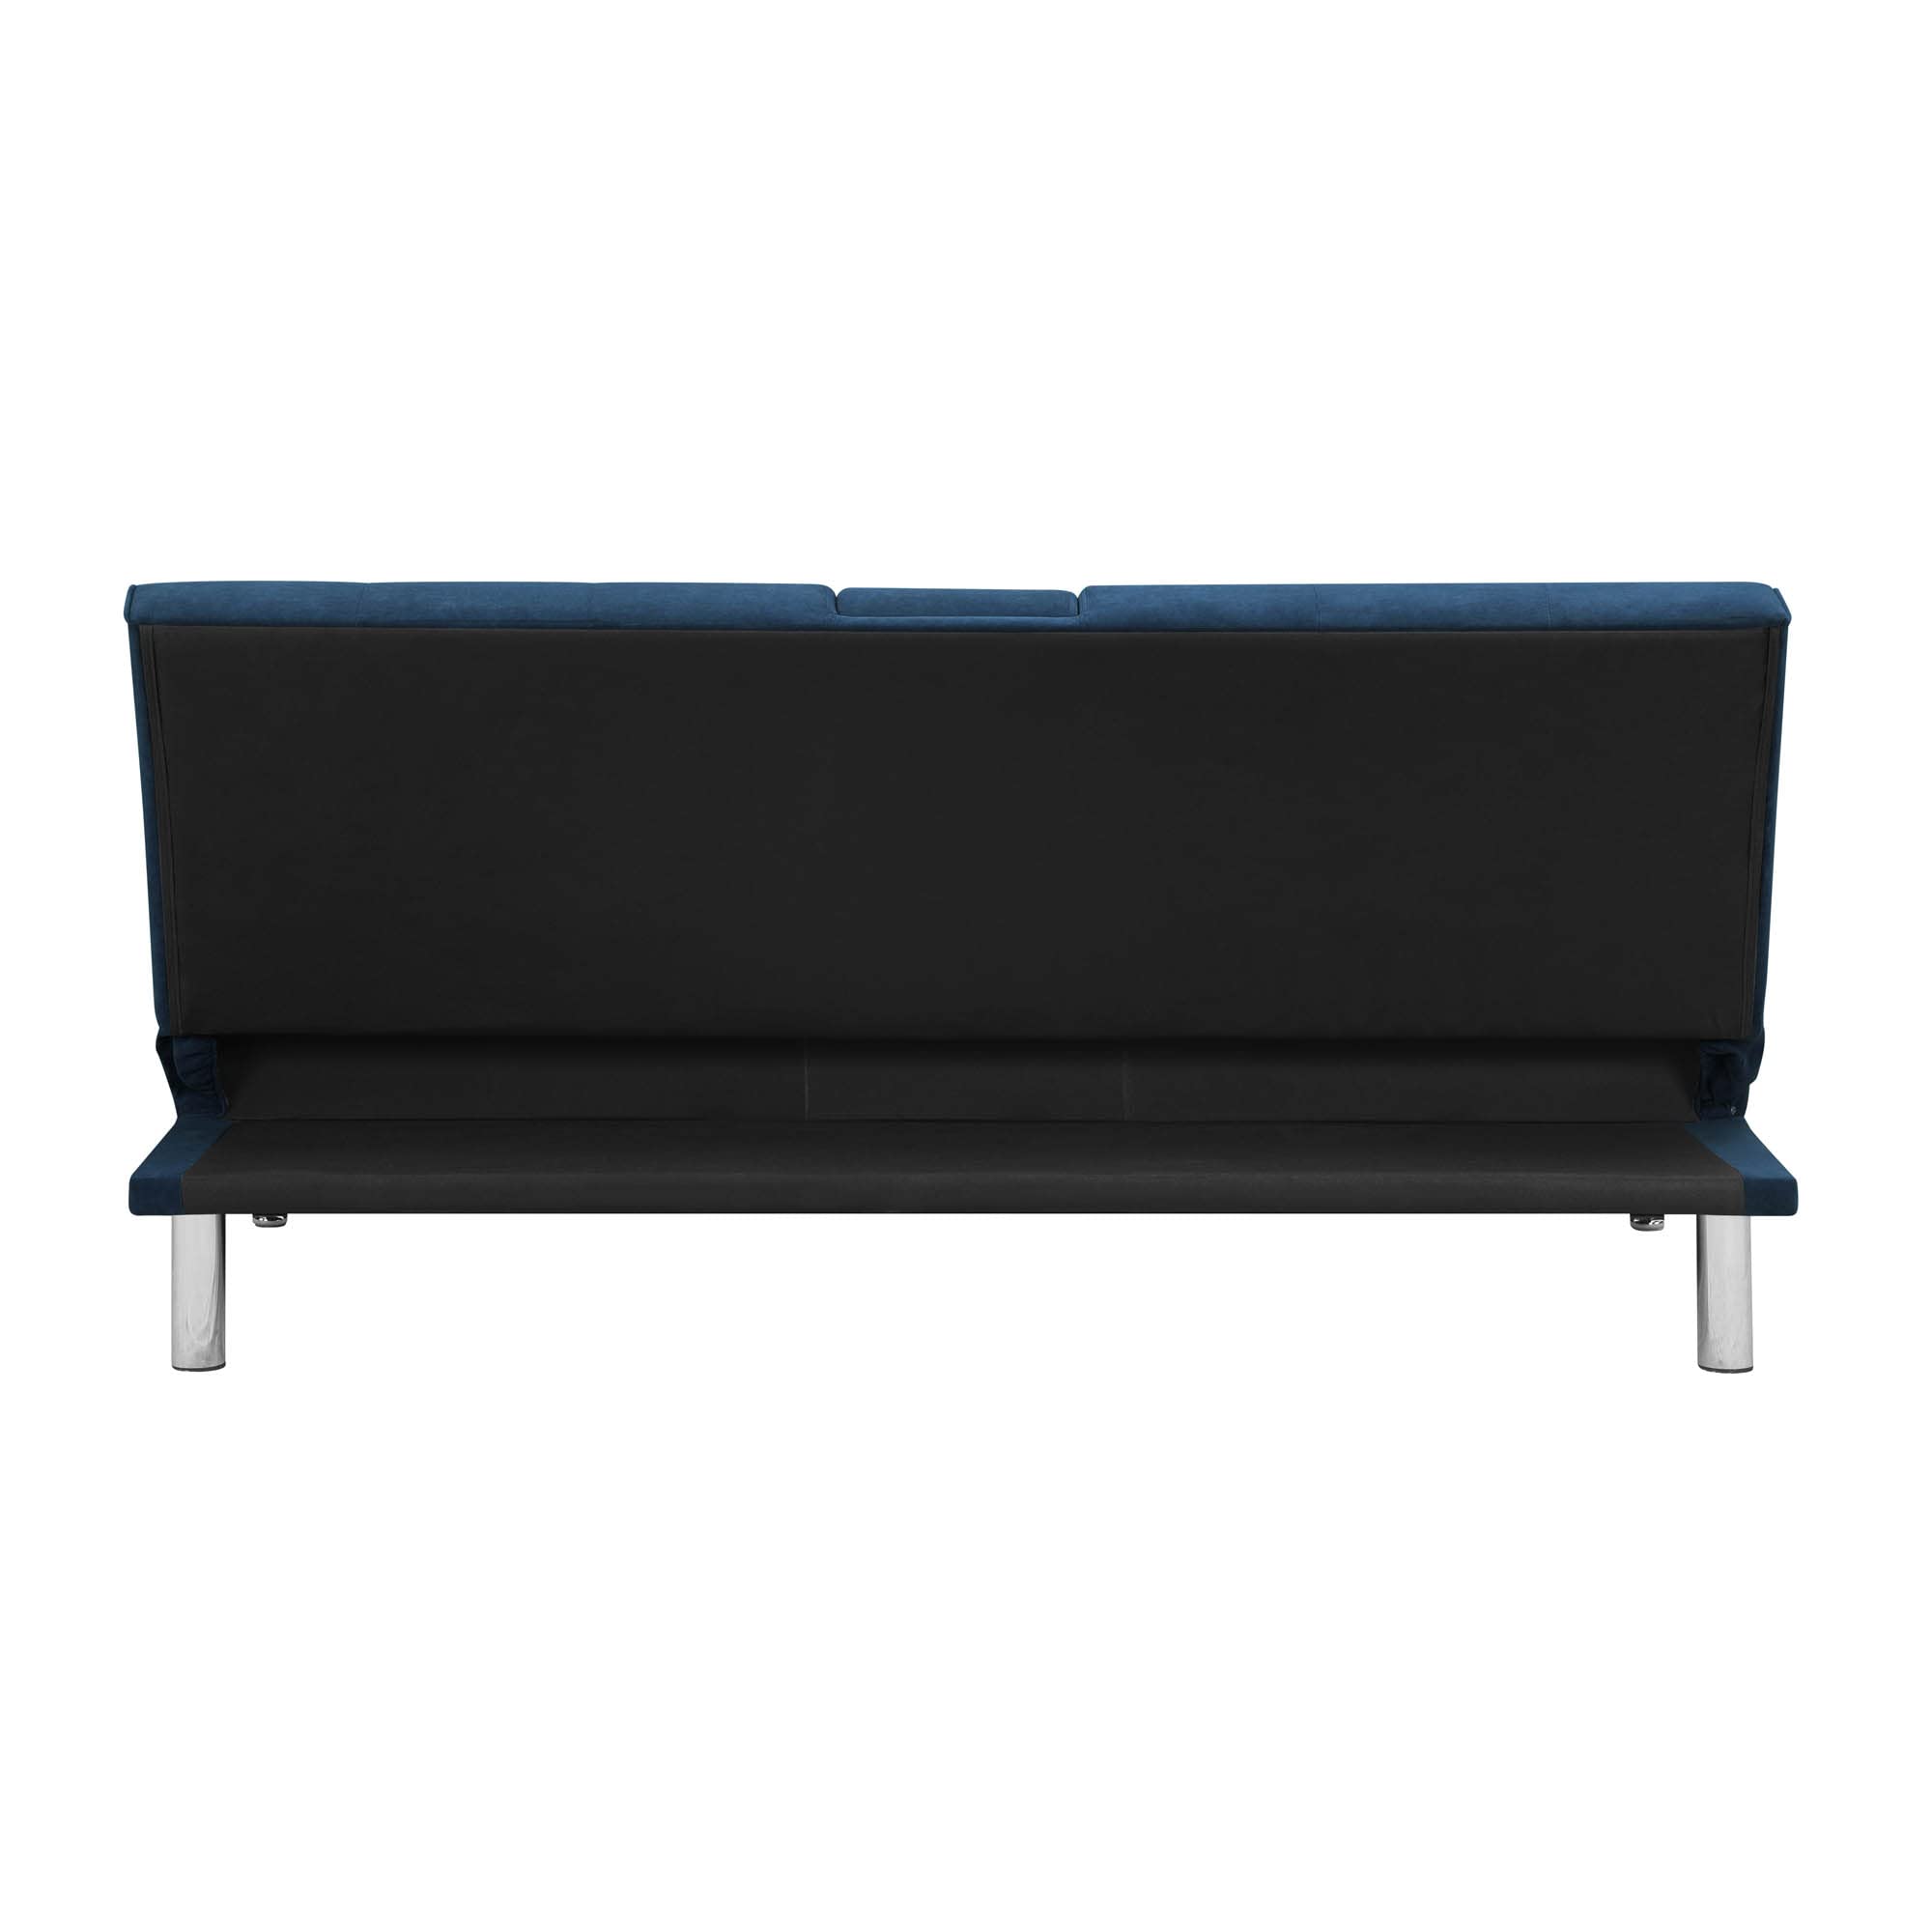 Lifestyle Solutions Maryland Convertible Sectional Sofa, Navy Blue